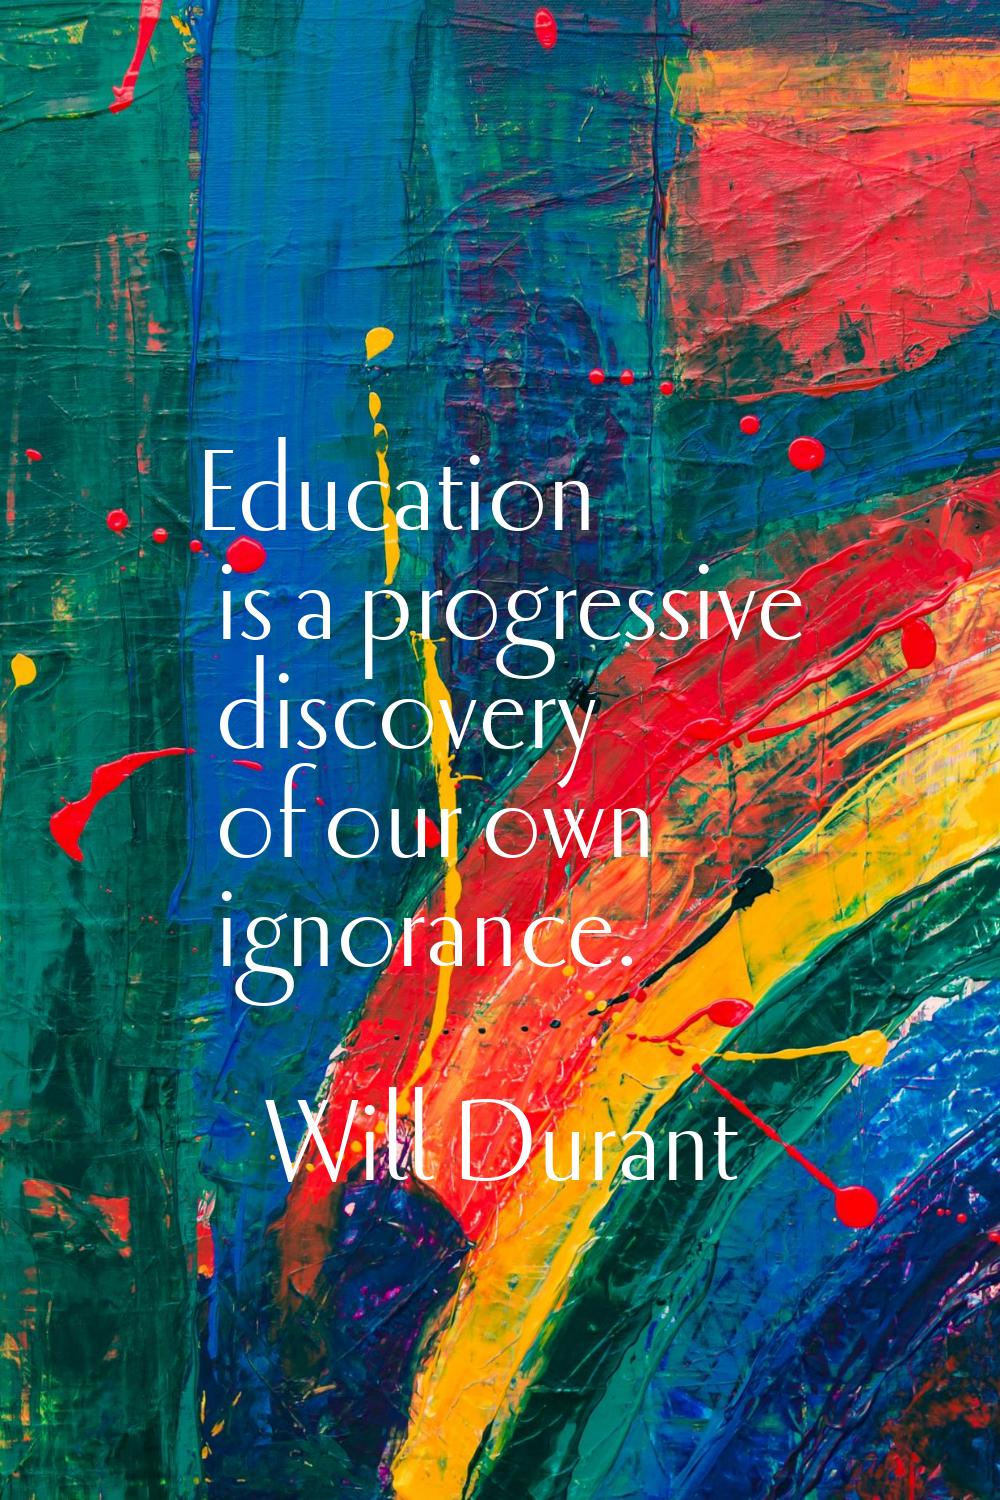 Education is a progressive discovery of our own ignorance.